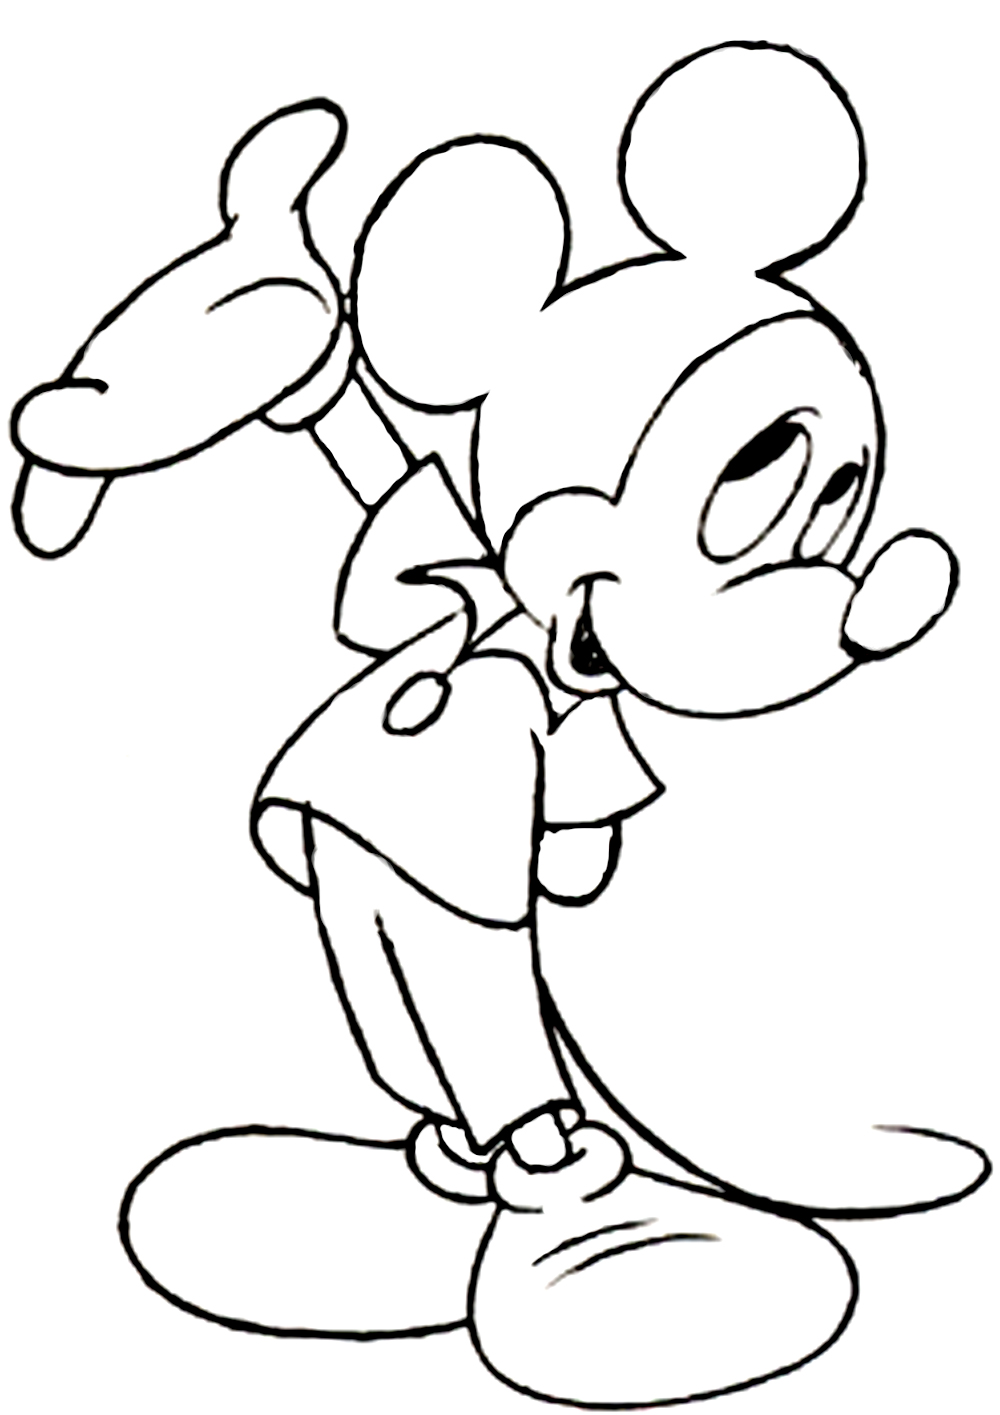 http://www.howtodrawguide.com/wp-content/uploads/image/how-to-draw-cartoons/draw-mickey-mouse/mickey-white-papers.jpg